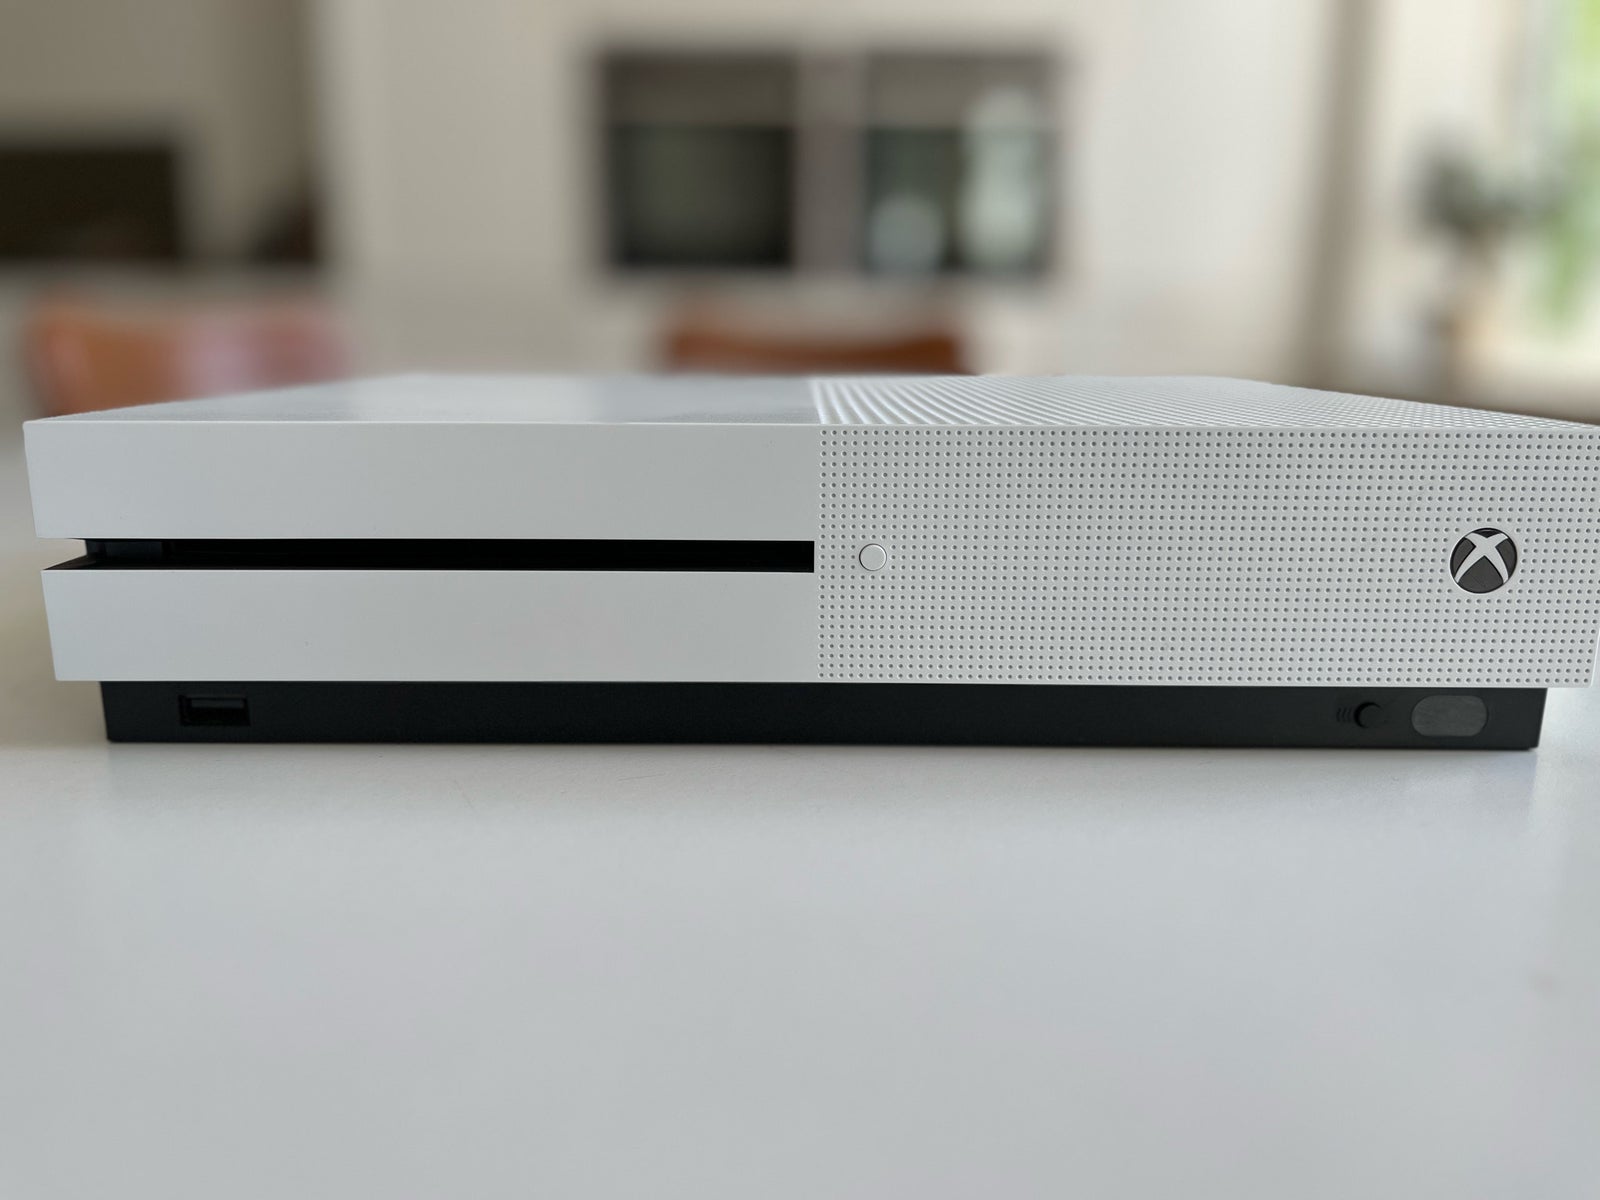 Xbox One S, Xbox One S, med Star Wars Battlefront 2